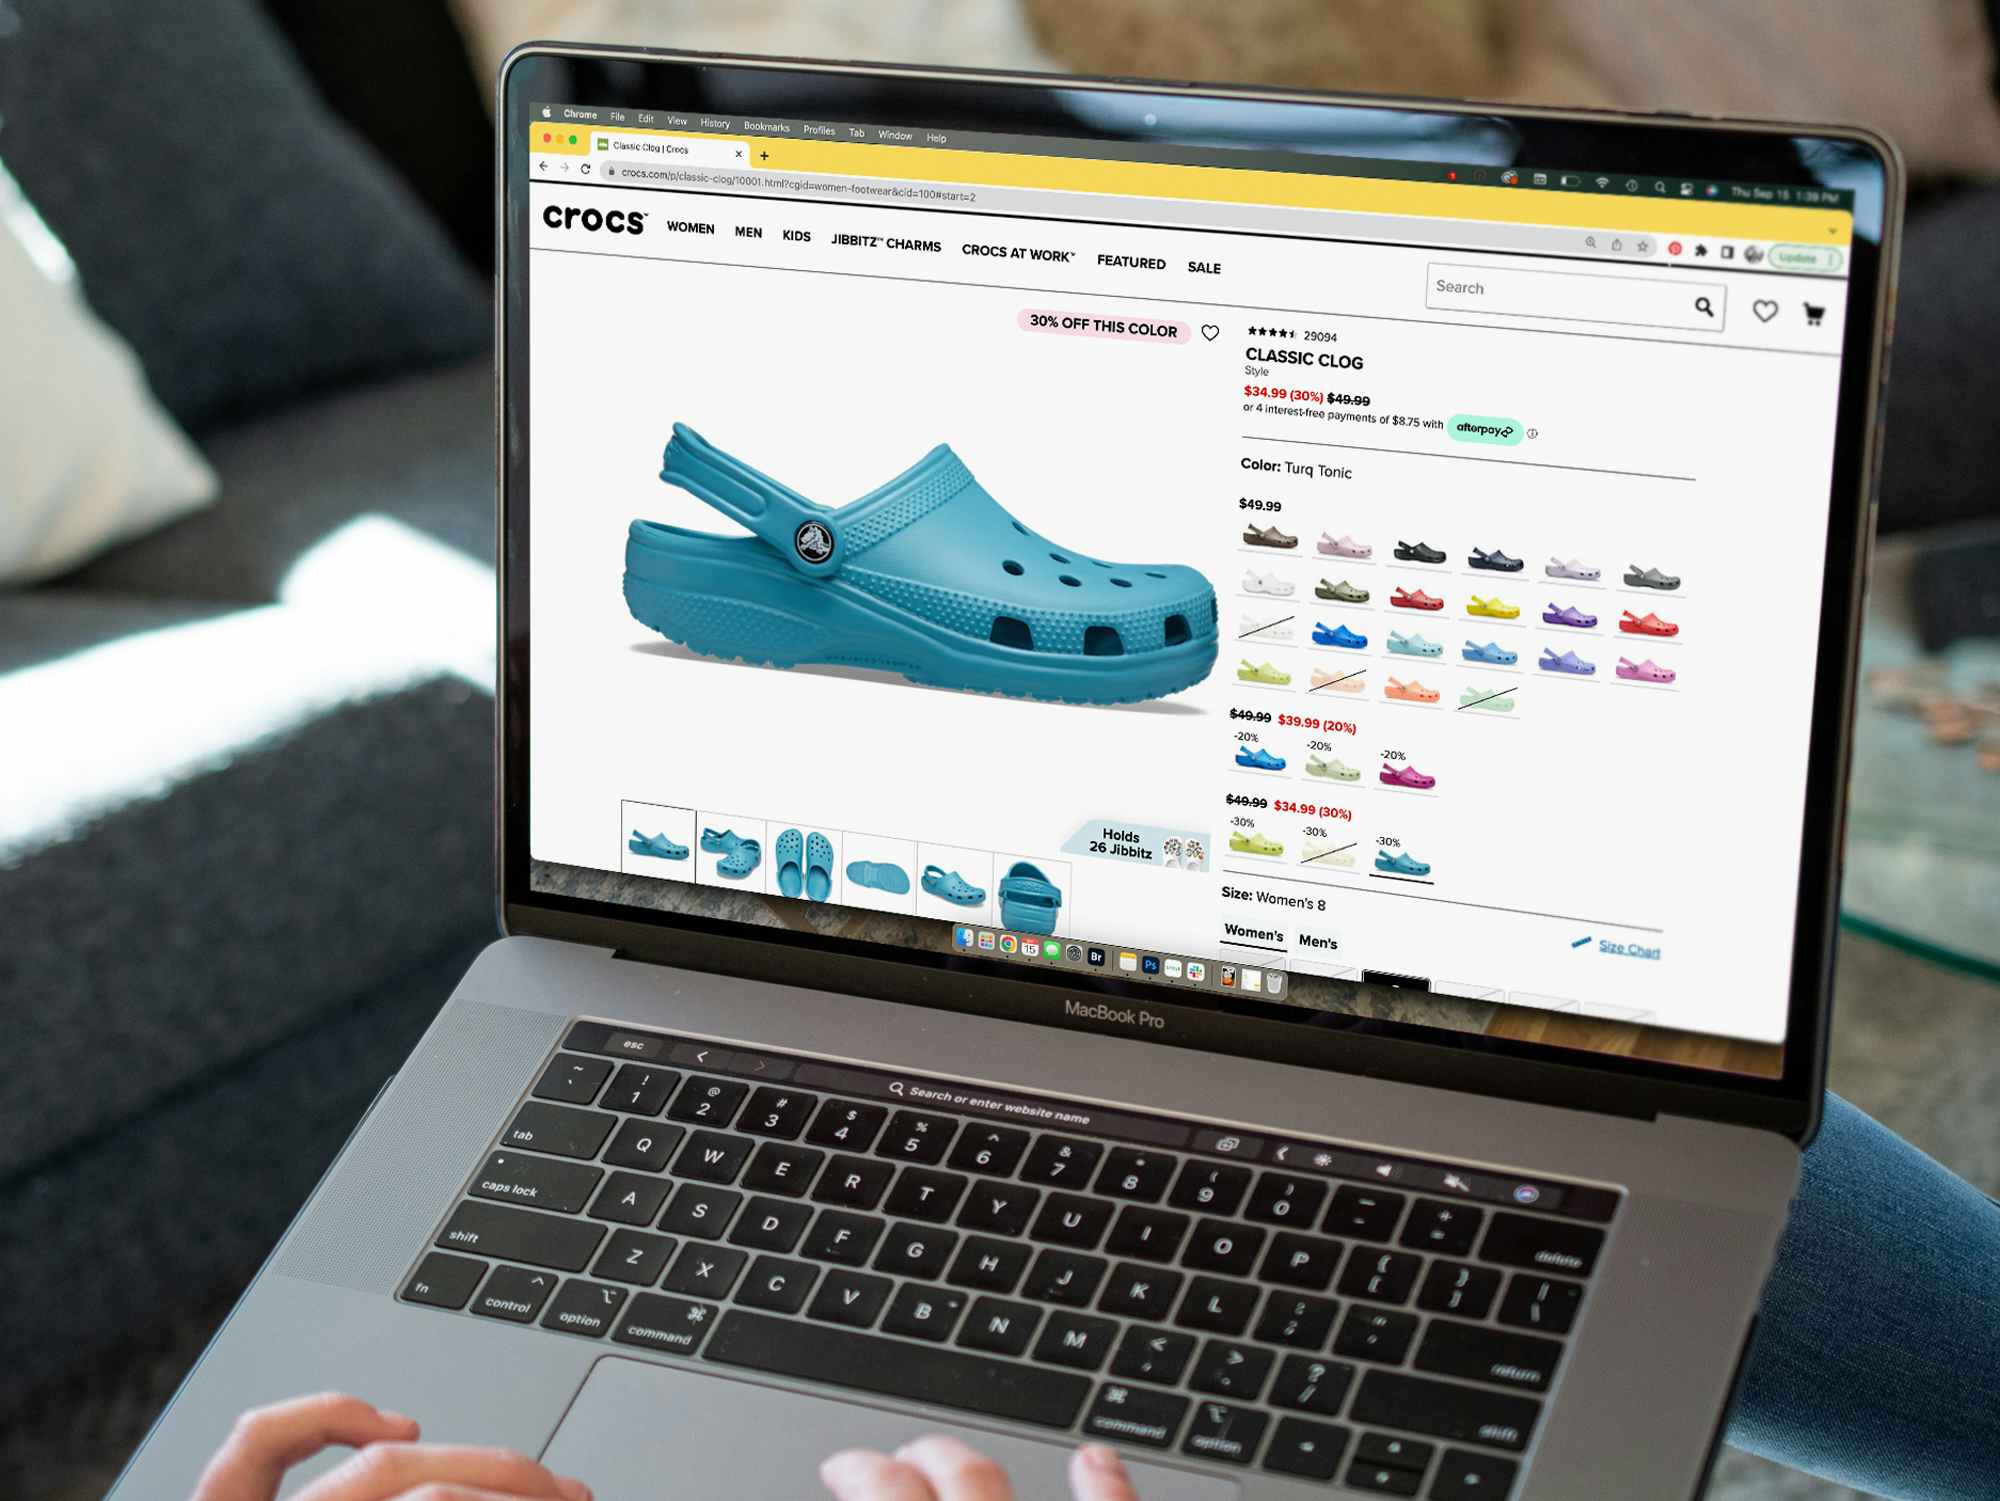 A person looking at the sale price of a pair of crocs on crocs.com.